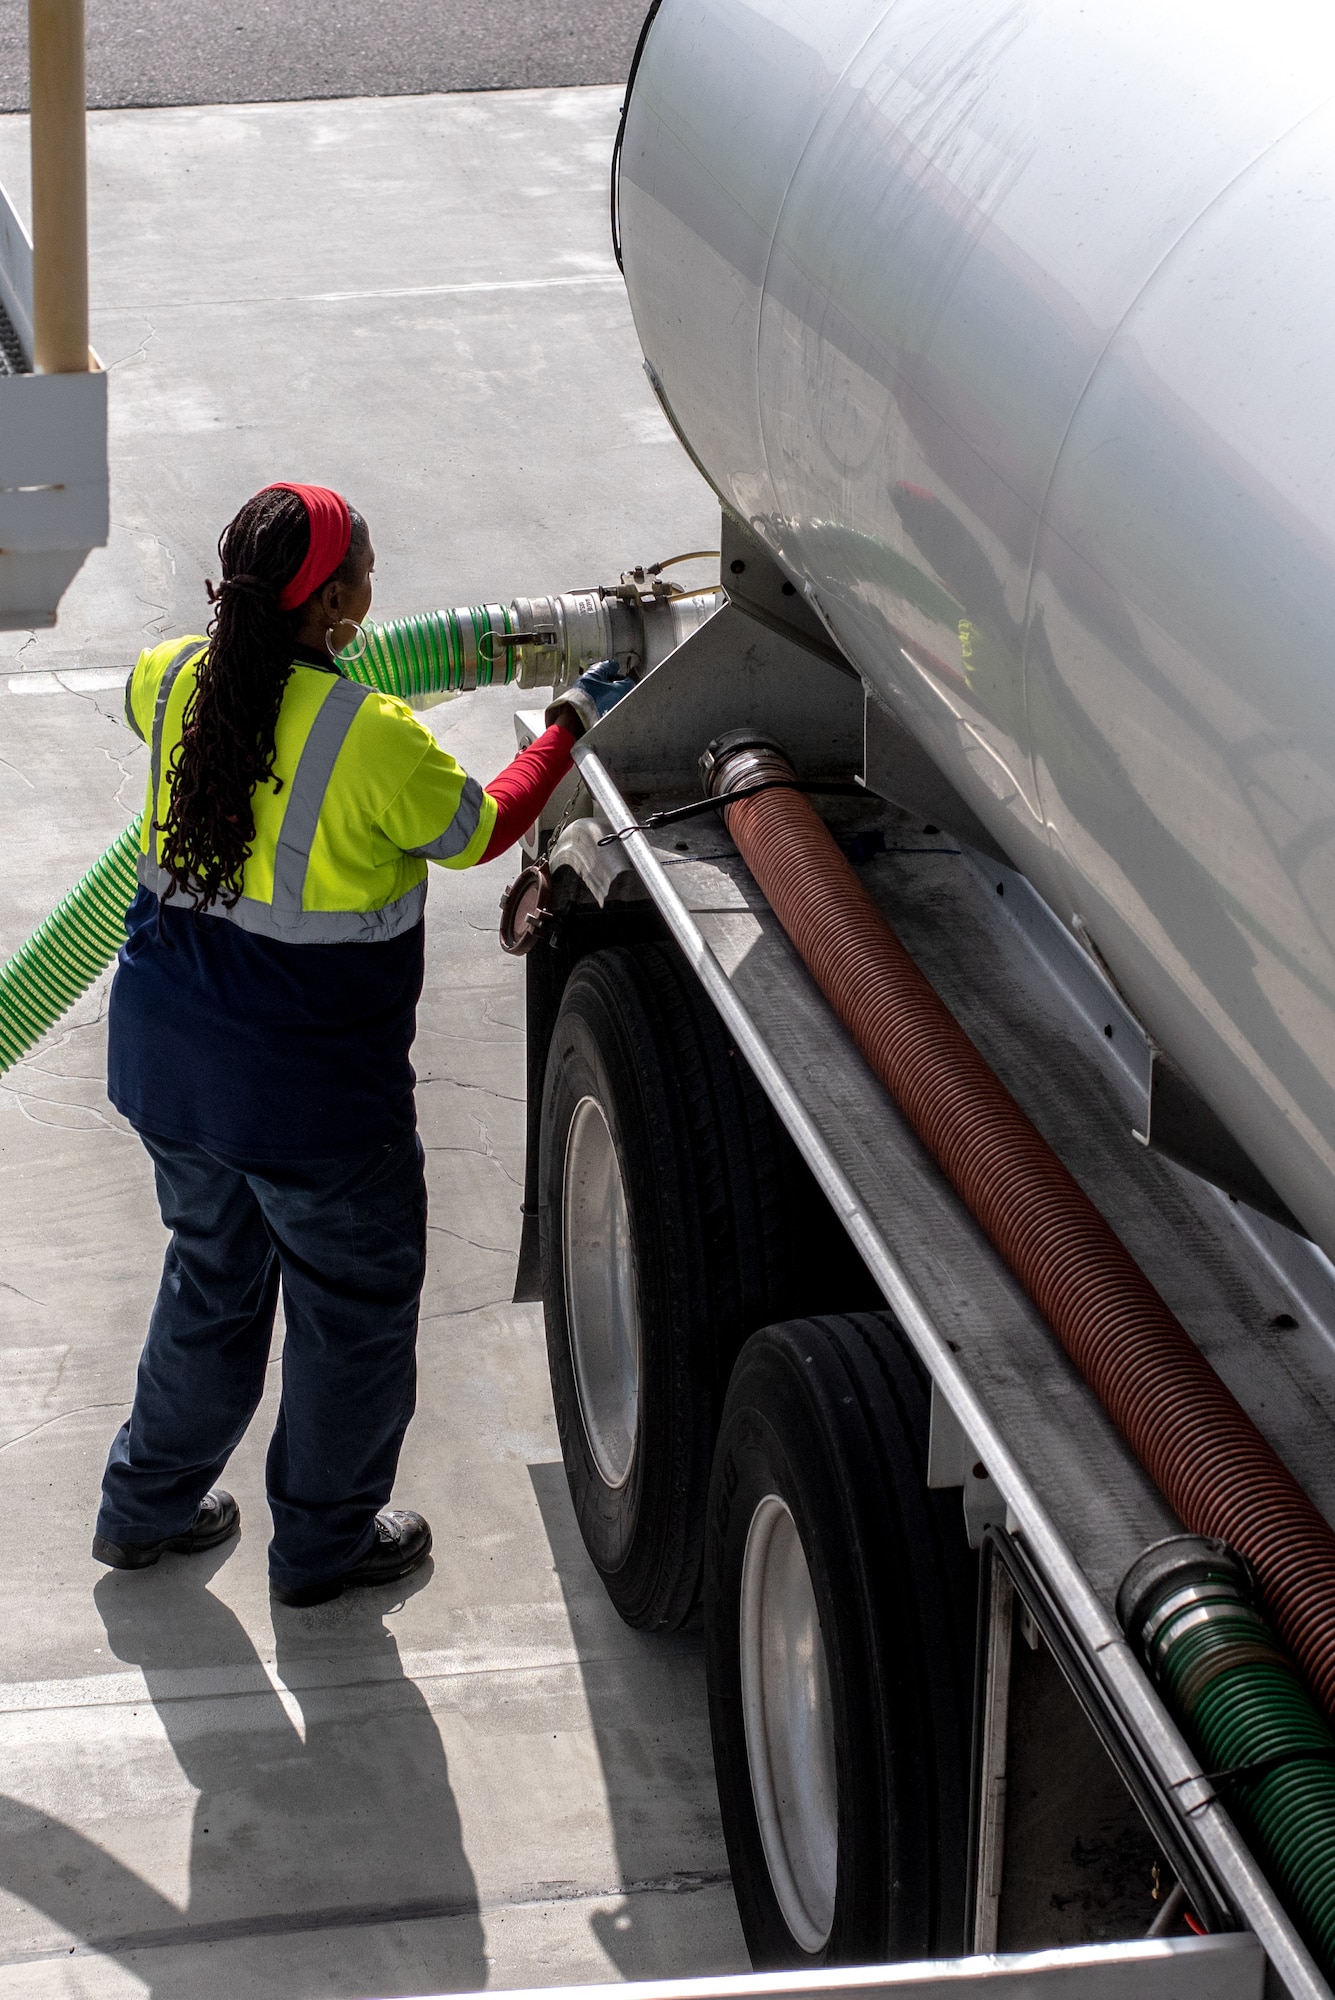 Yolanda Bush, Torrissi petroleum company transporter operator, connects an air vent hose to a fuel supply tanker truck at MacDill Air Force Base, Florida, August 22, 2023.